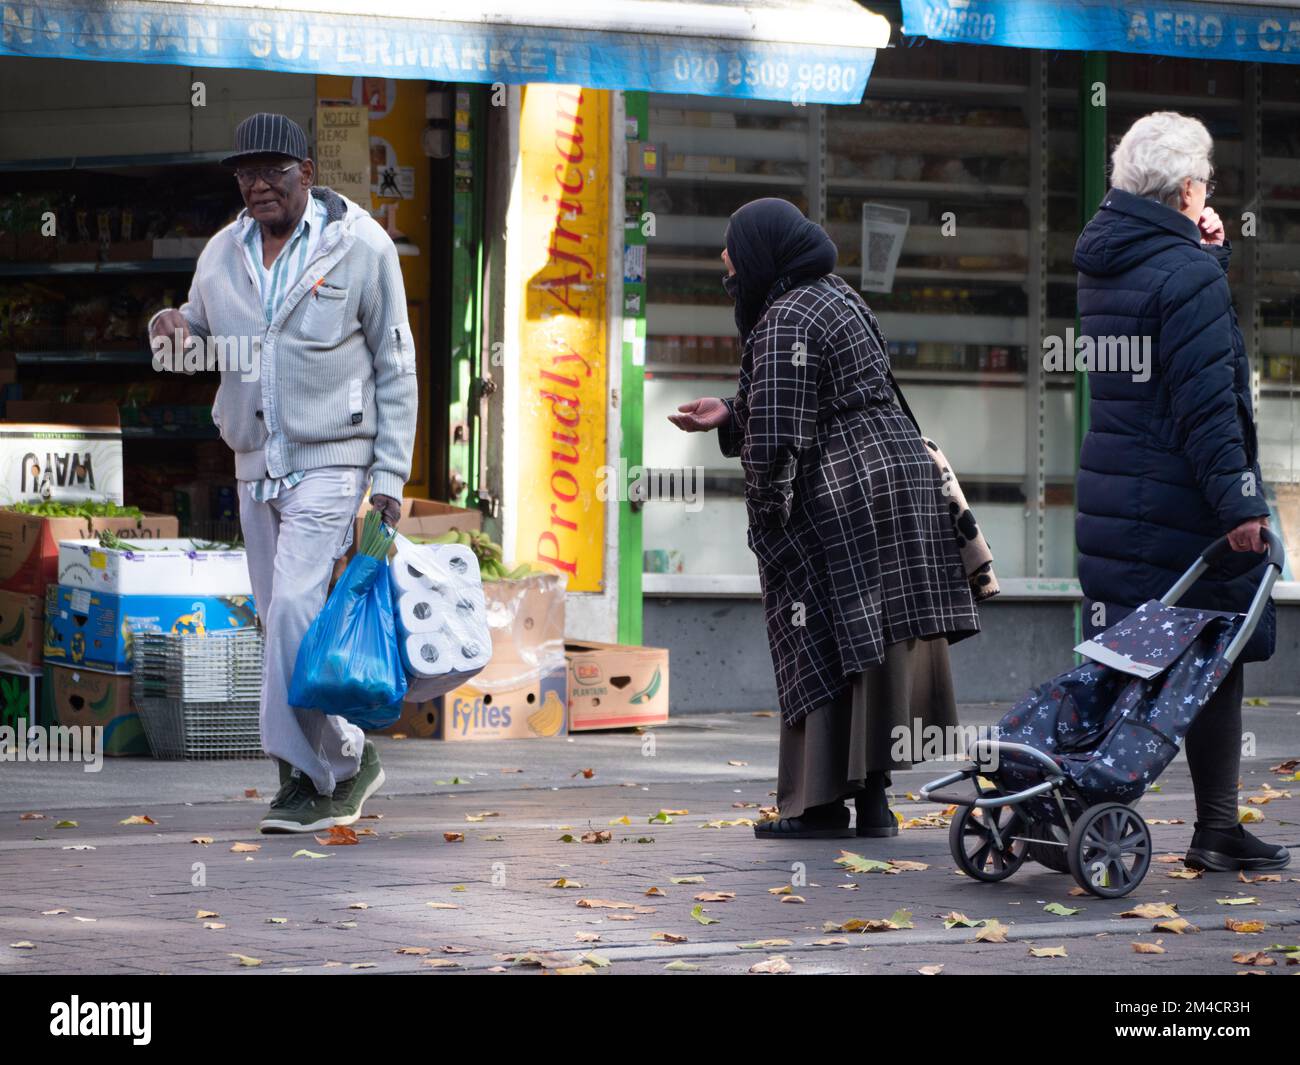 A homeless beggar, begging for cash in Walthamstow market, London, UK, the longest outdoor market in Europe, Stock Photo